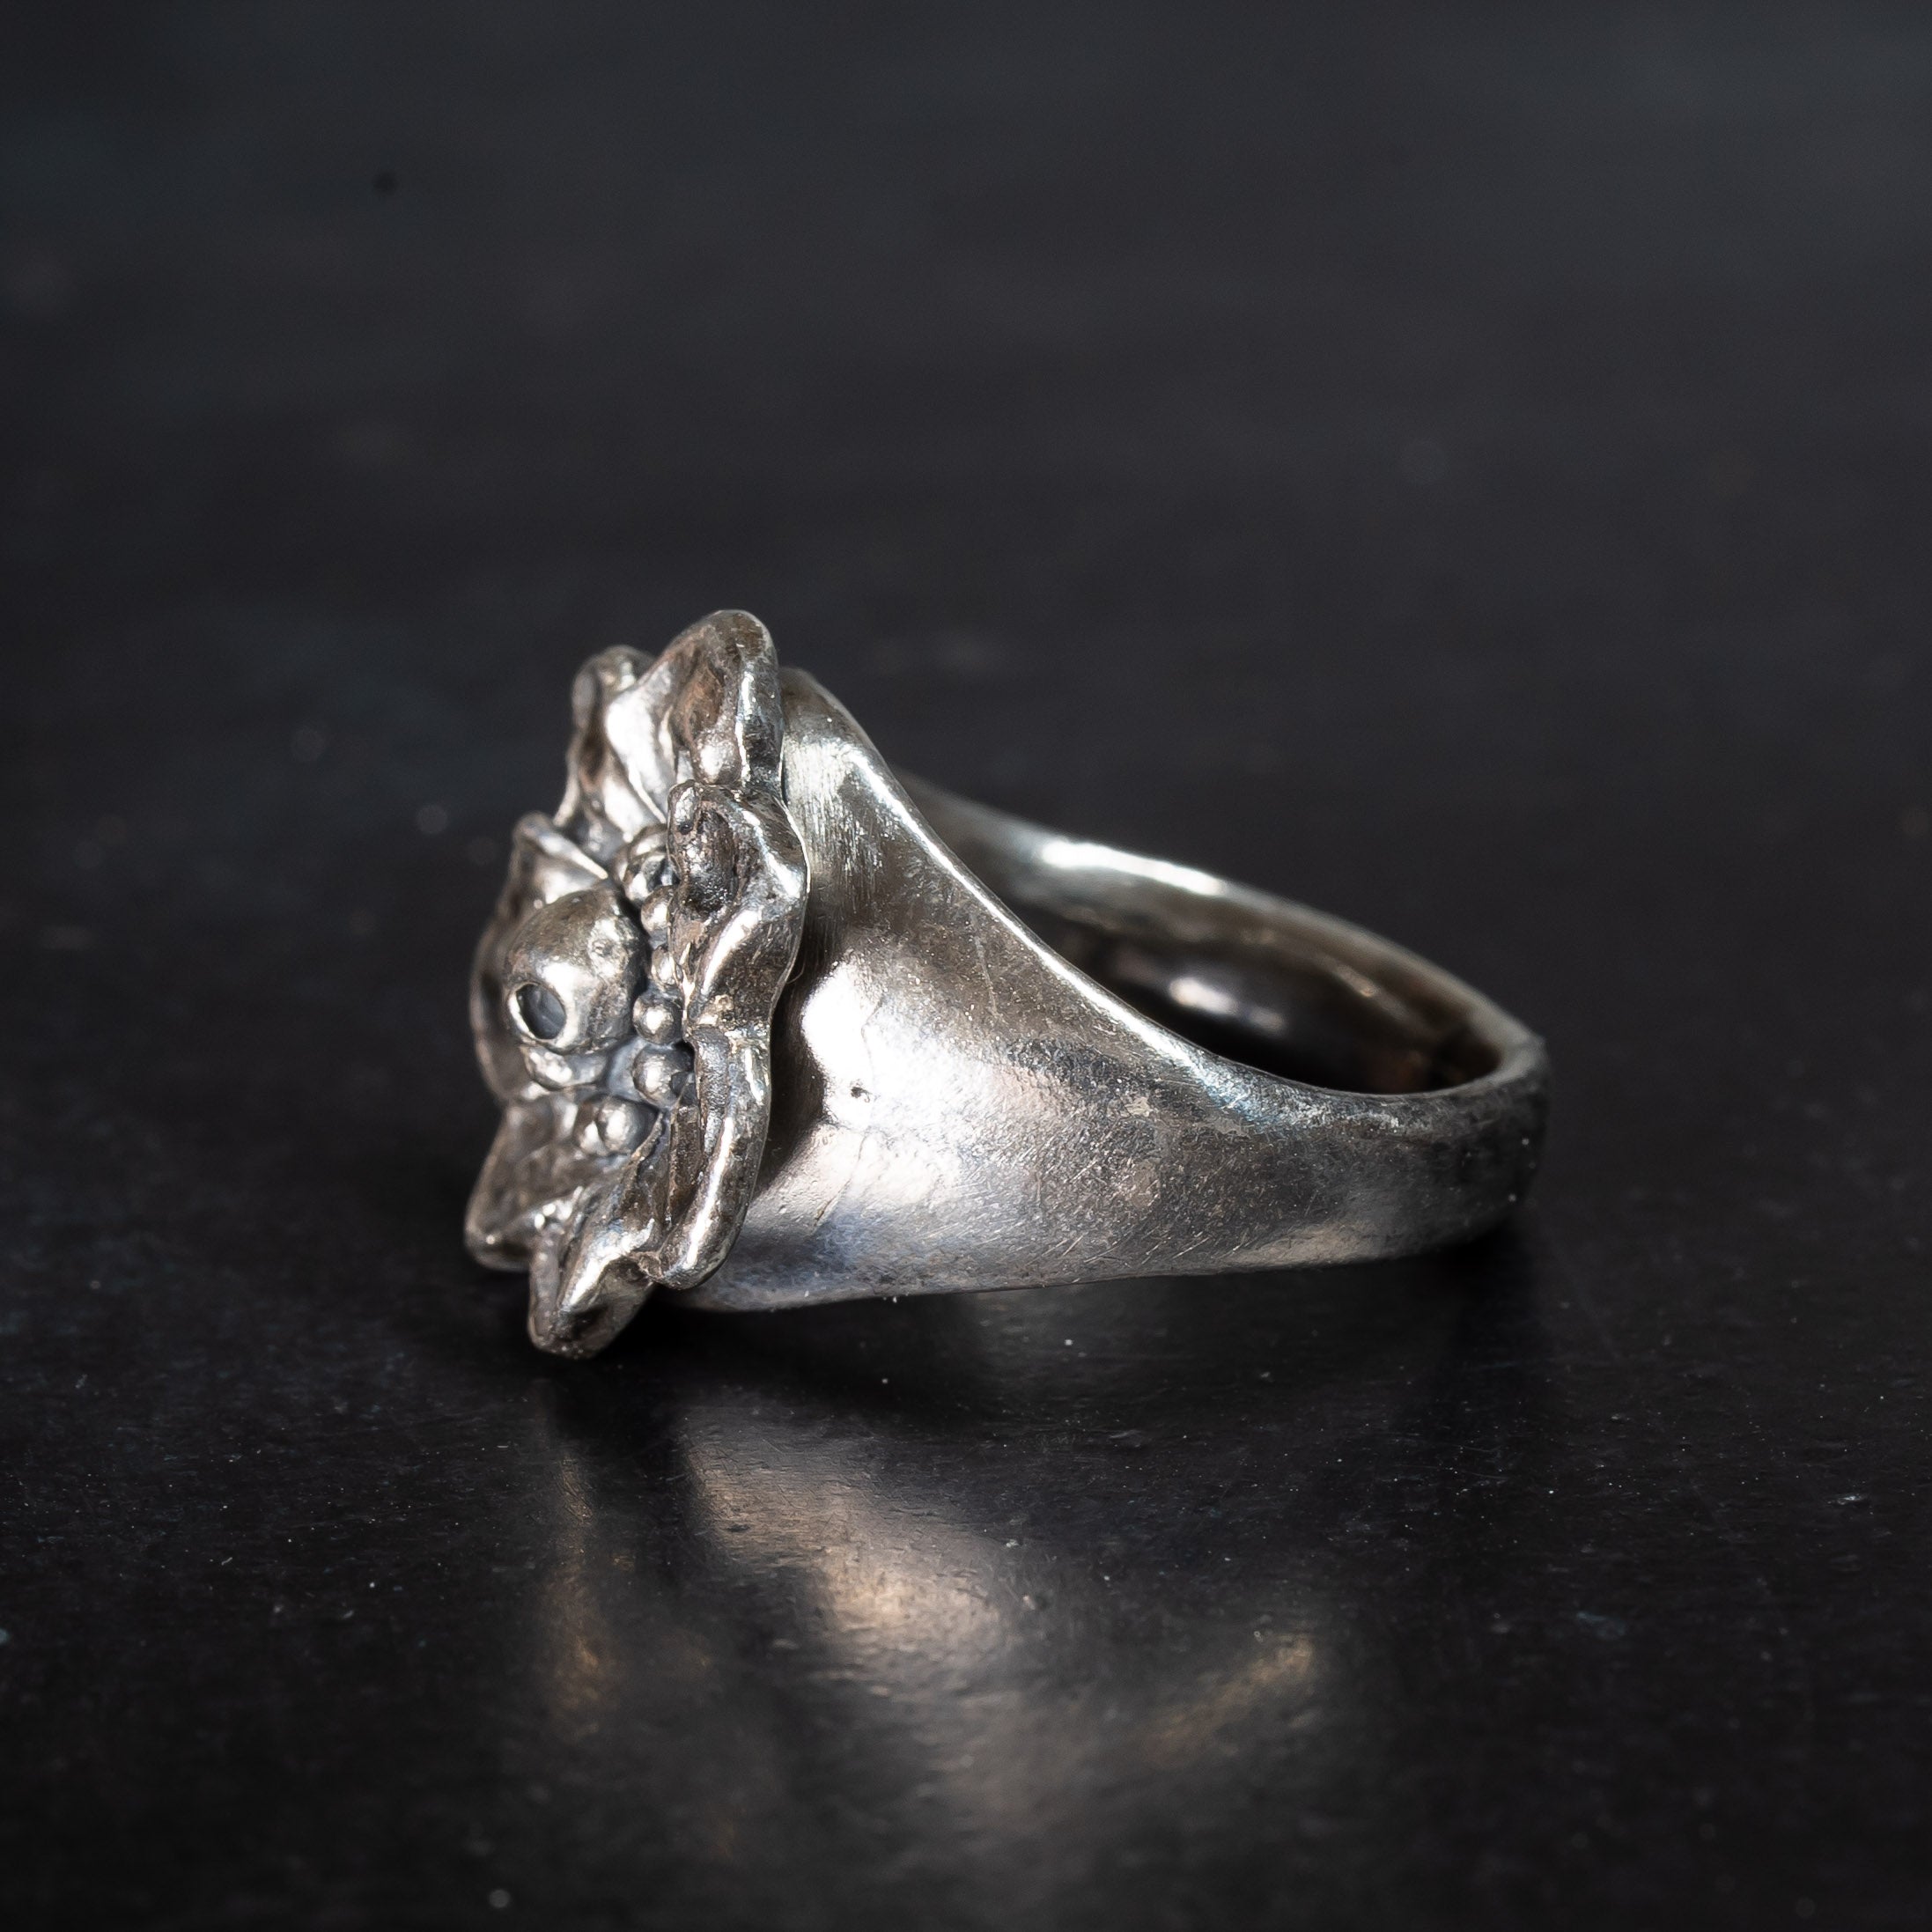 Witchy style silver rings